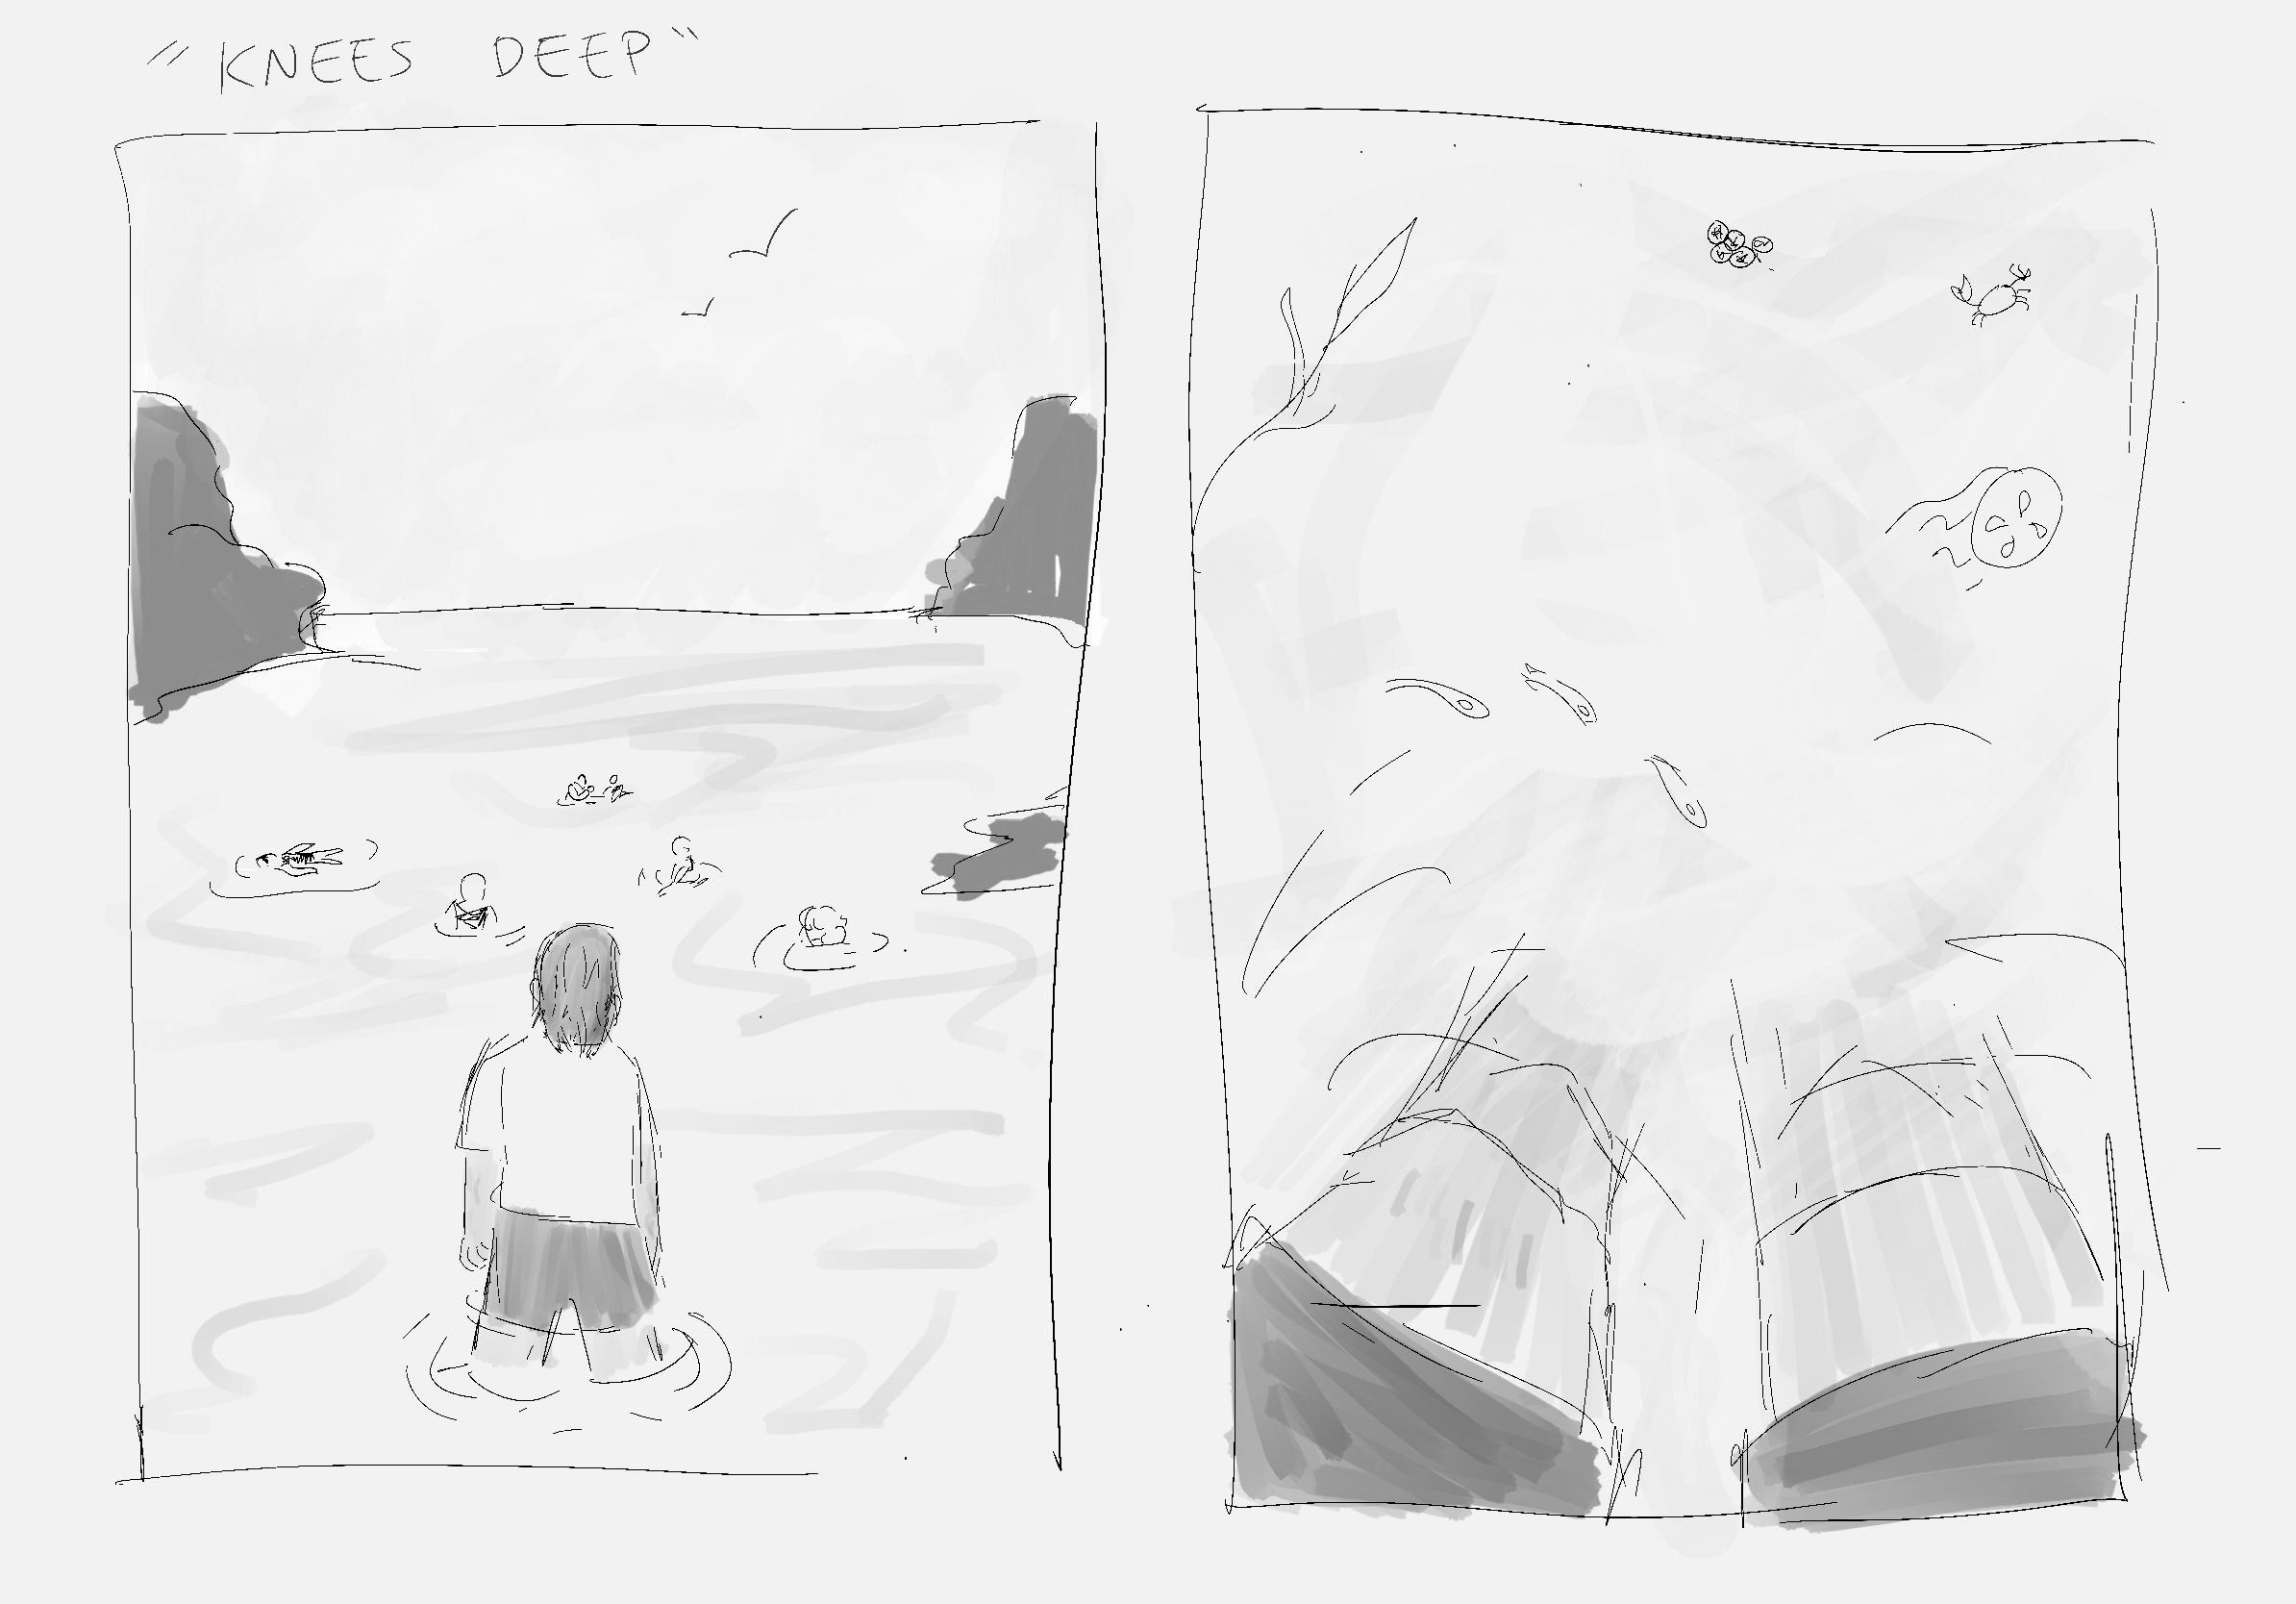 a two panel grayscale comic with loose lines. in panel one, a figure stands in the oceanwith their back to the viewer, and in the background there are other people swimming. in panel two, there is a downwardview of legs standing in the ocean with fish, a jelly, a crab, and barnacles.